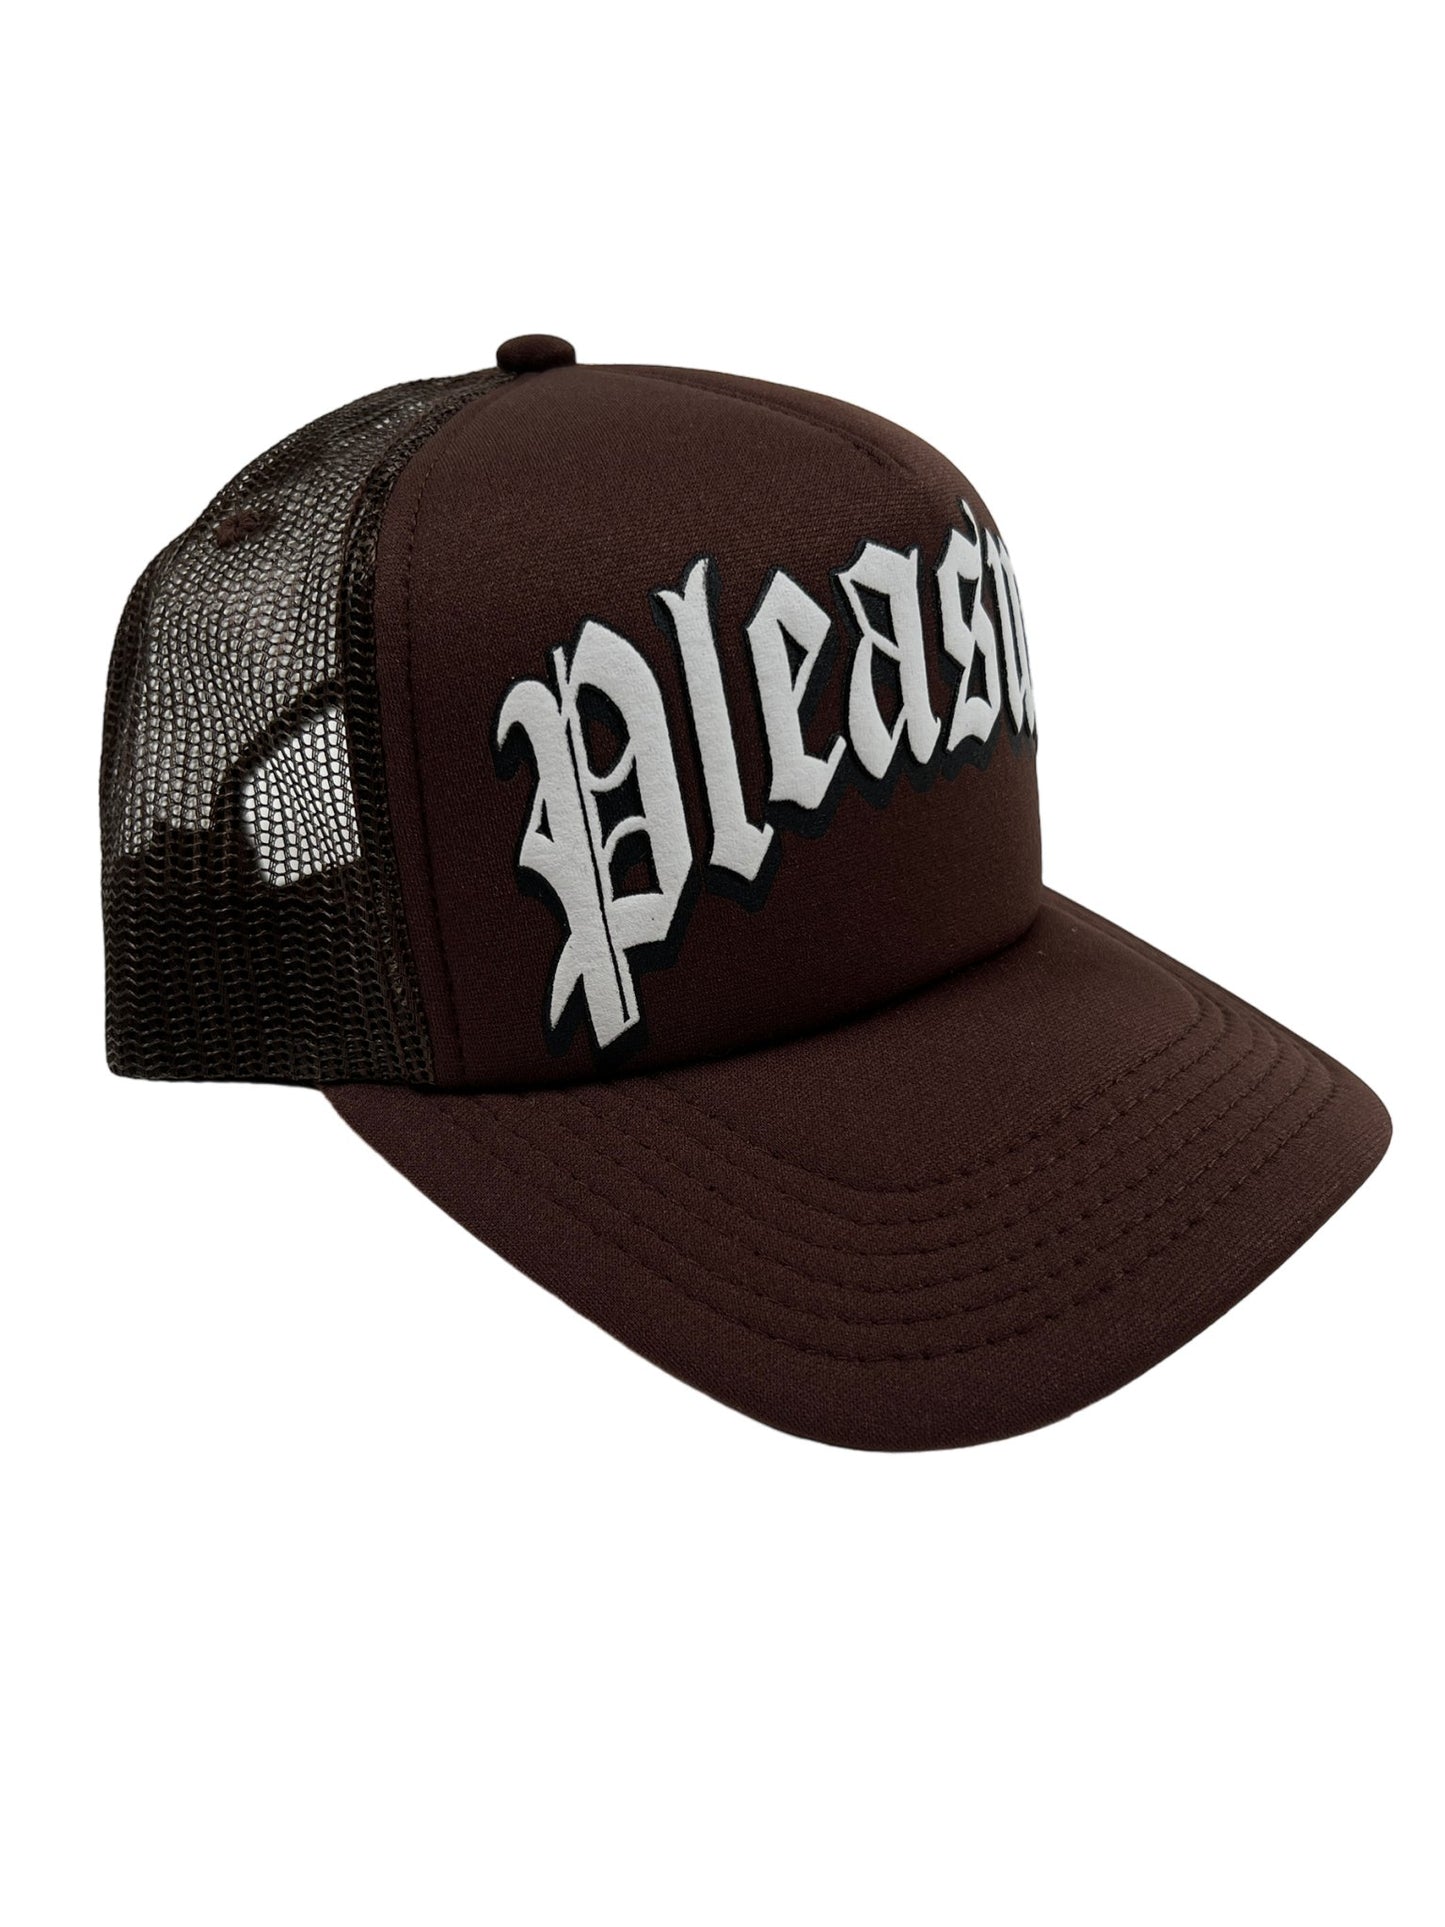 A brown polyester trucker hat with the PLEASURES TWITCH TRUCKER CAP BRW on it.